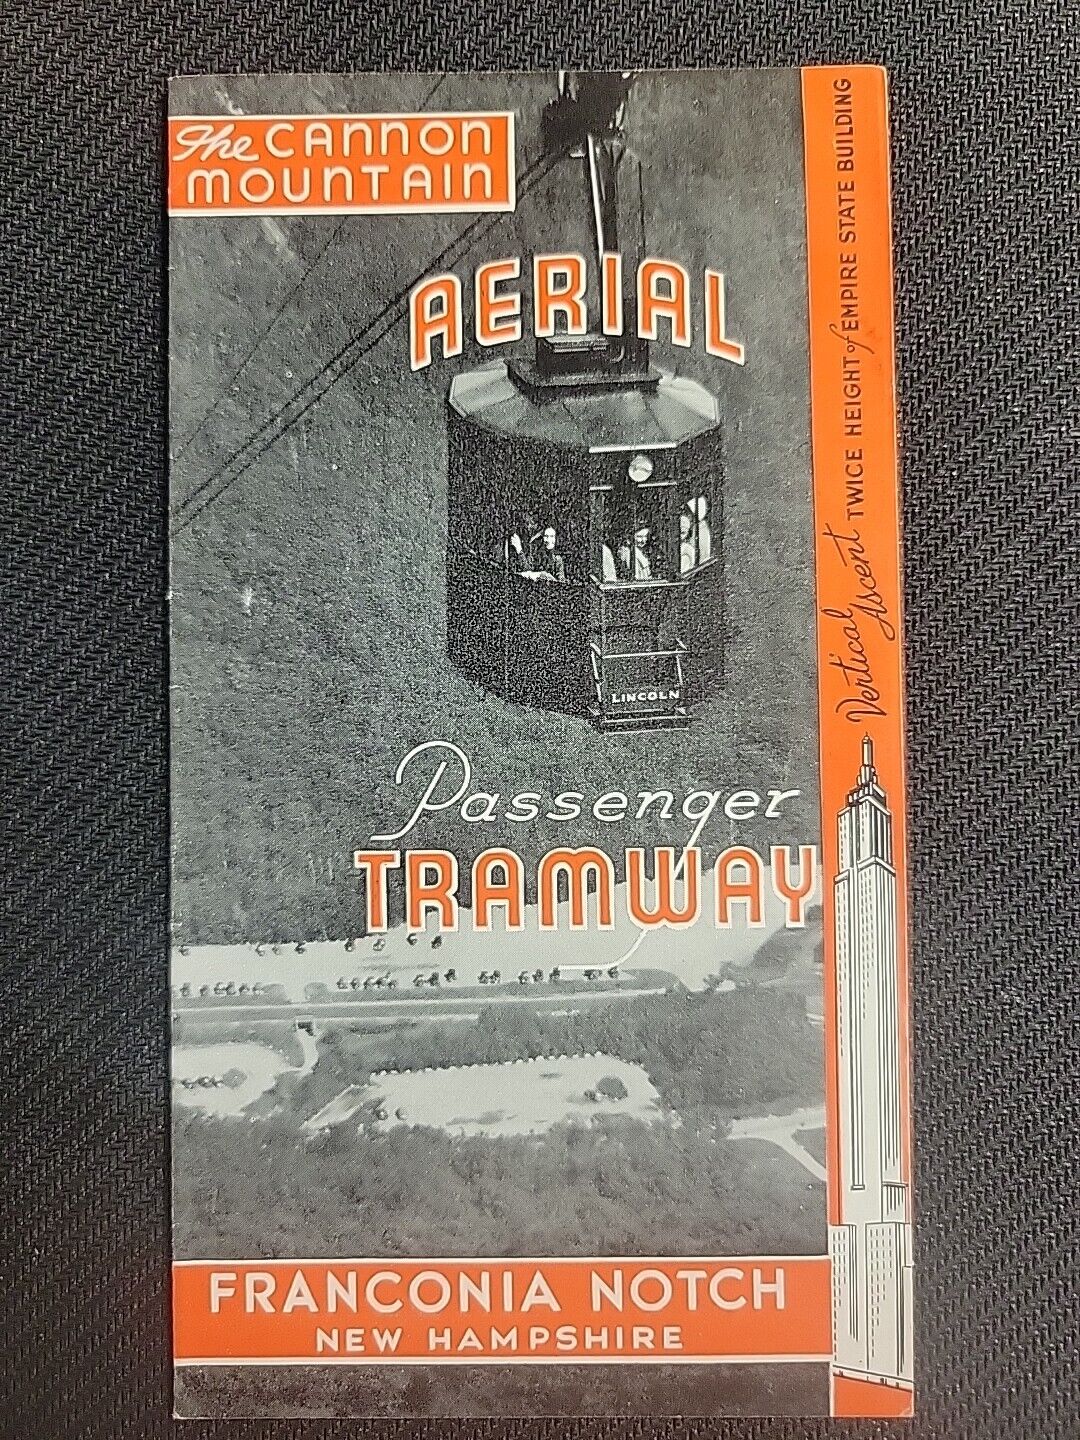 VINTAGE Cannon Mountain, Aerial Tramway, Franconia Notch, New Hampshire Brochure